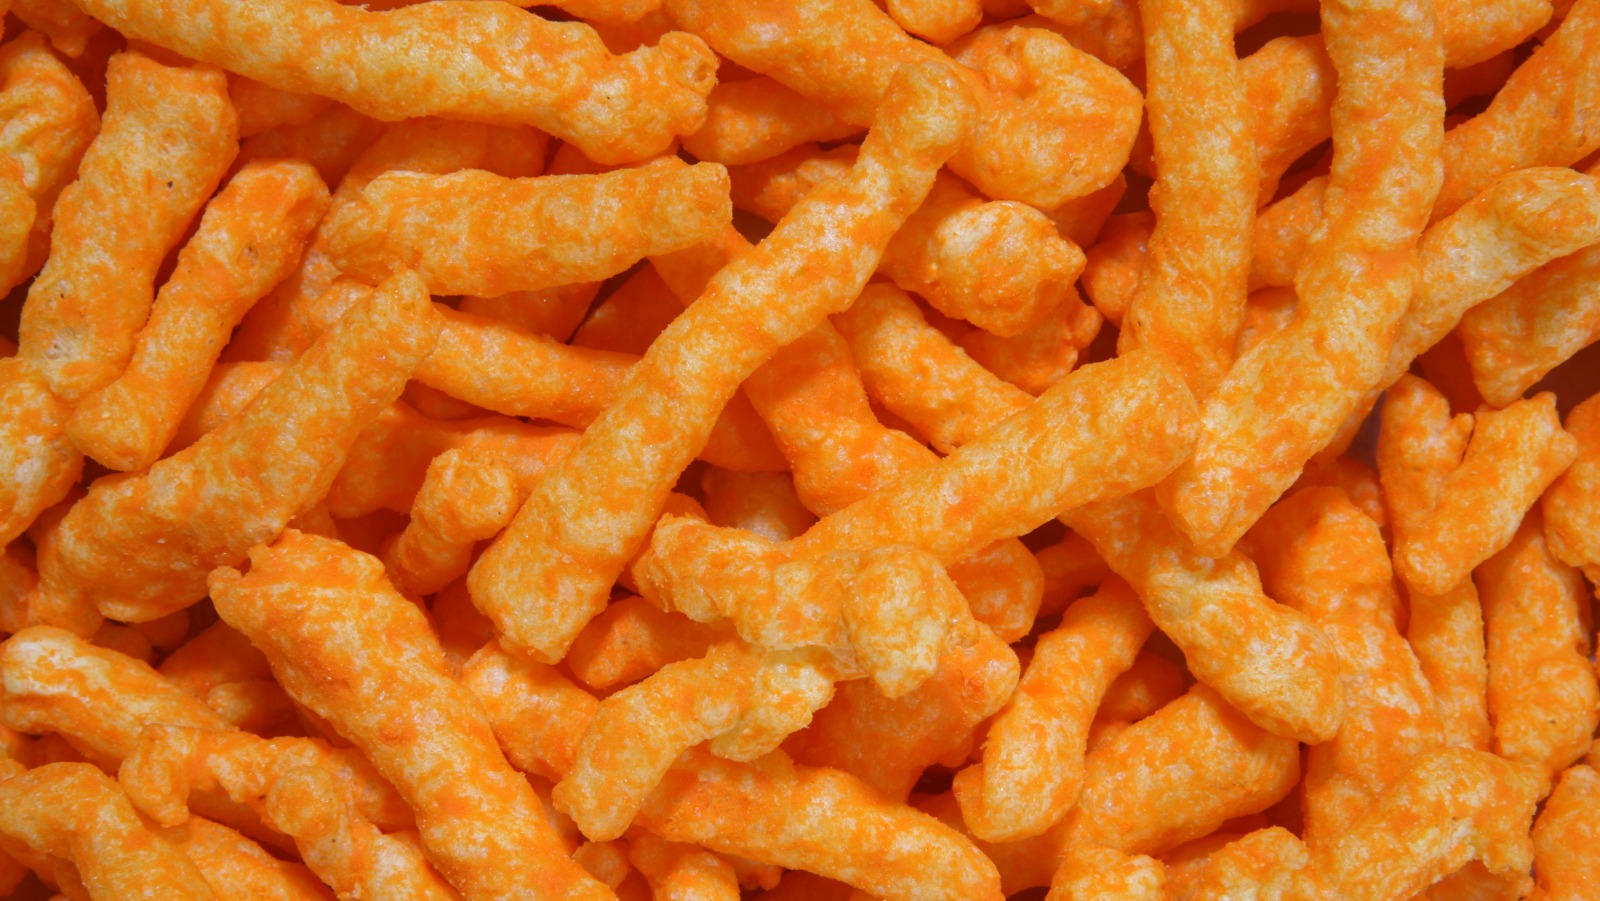 Which is your favorite kind of Cheetos: Crunchy or Puffs?